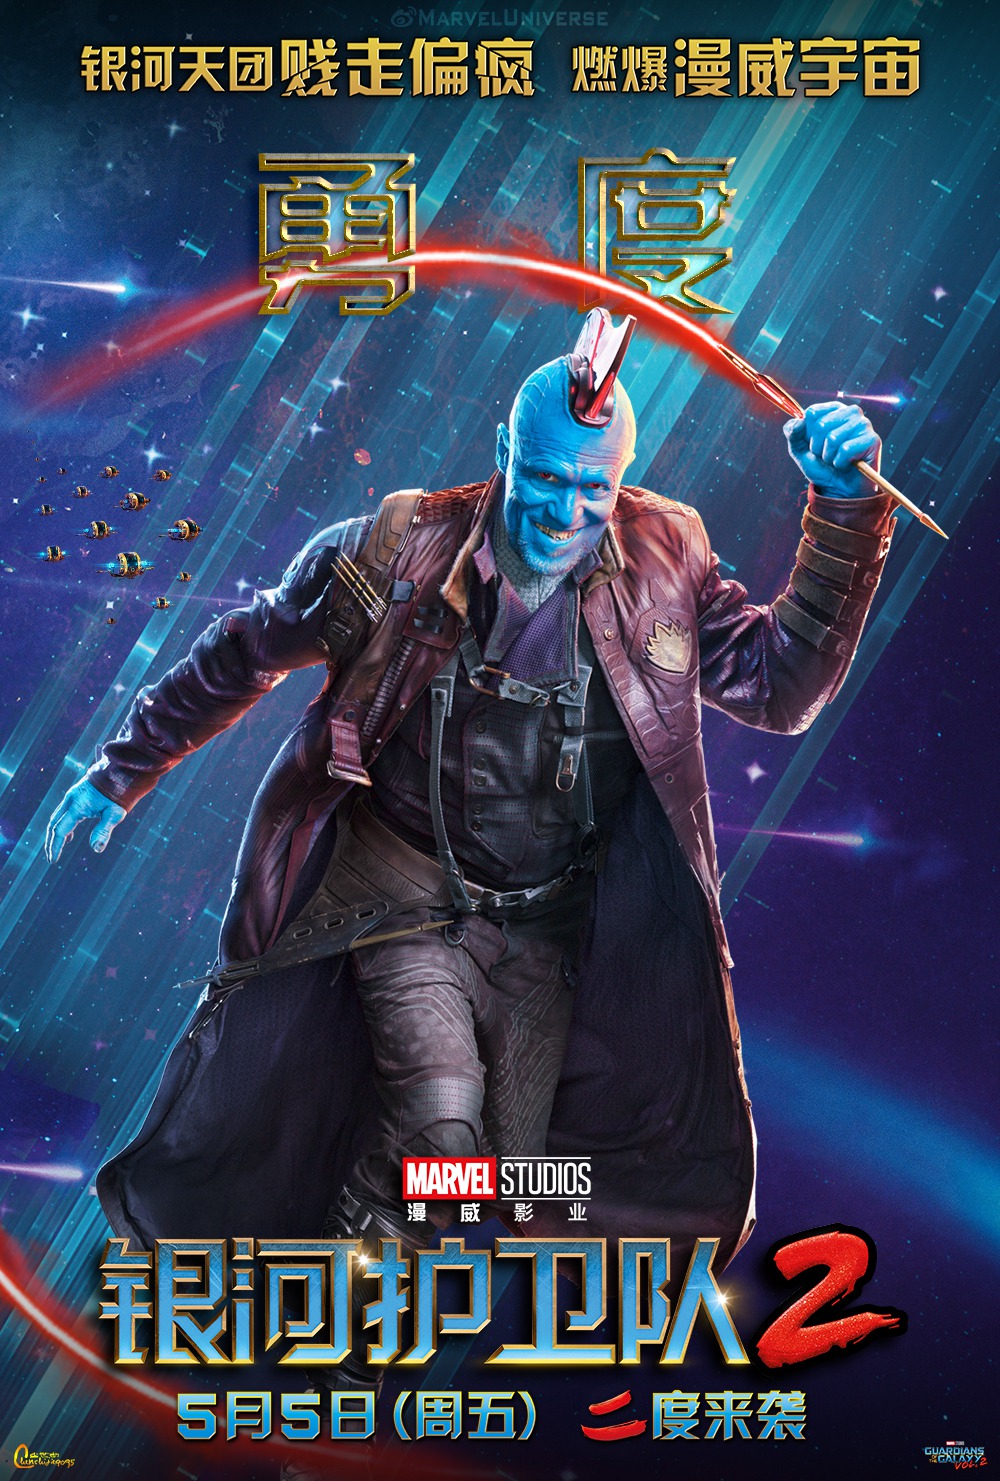 Extra Large Movie Poster Image for Guardians of the Galaxy Vol. 2 (#42 of 45)